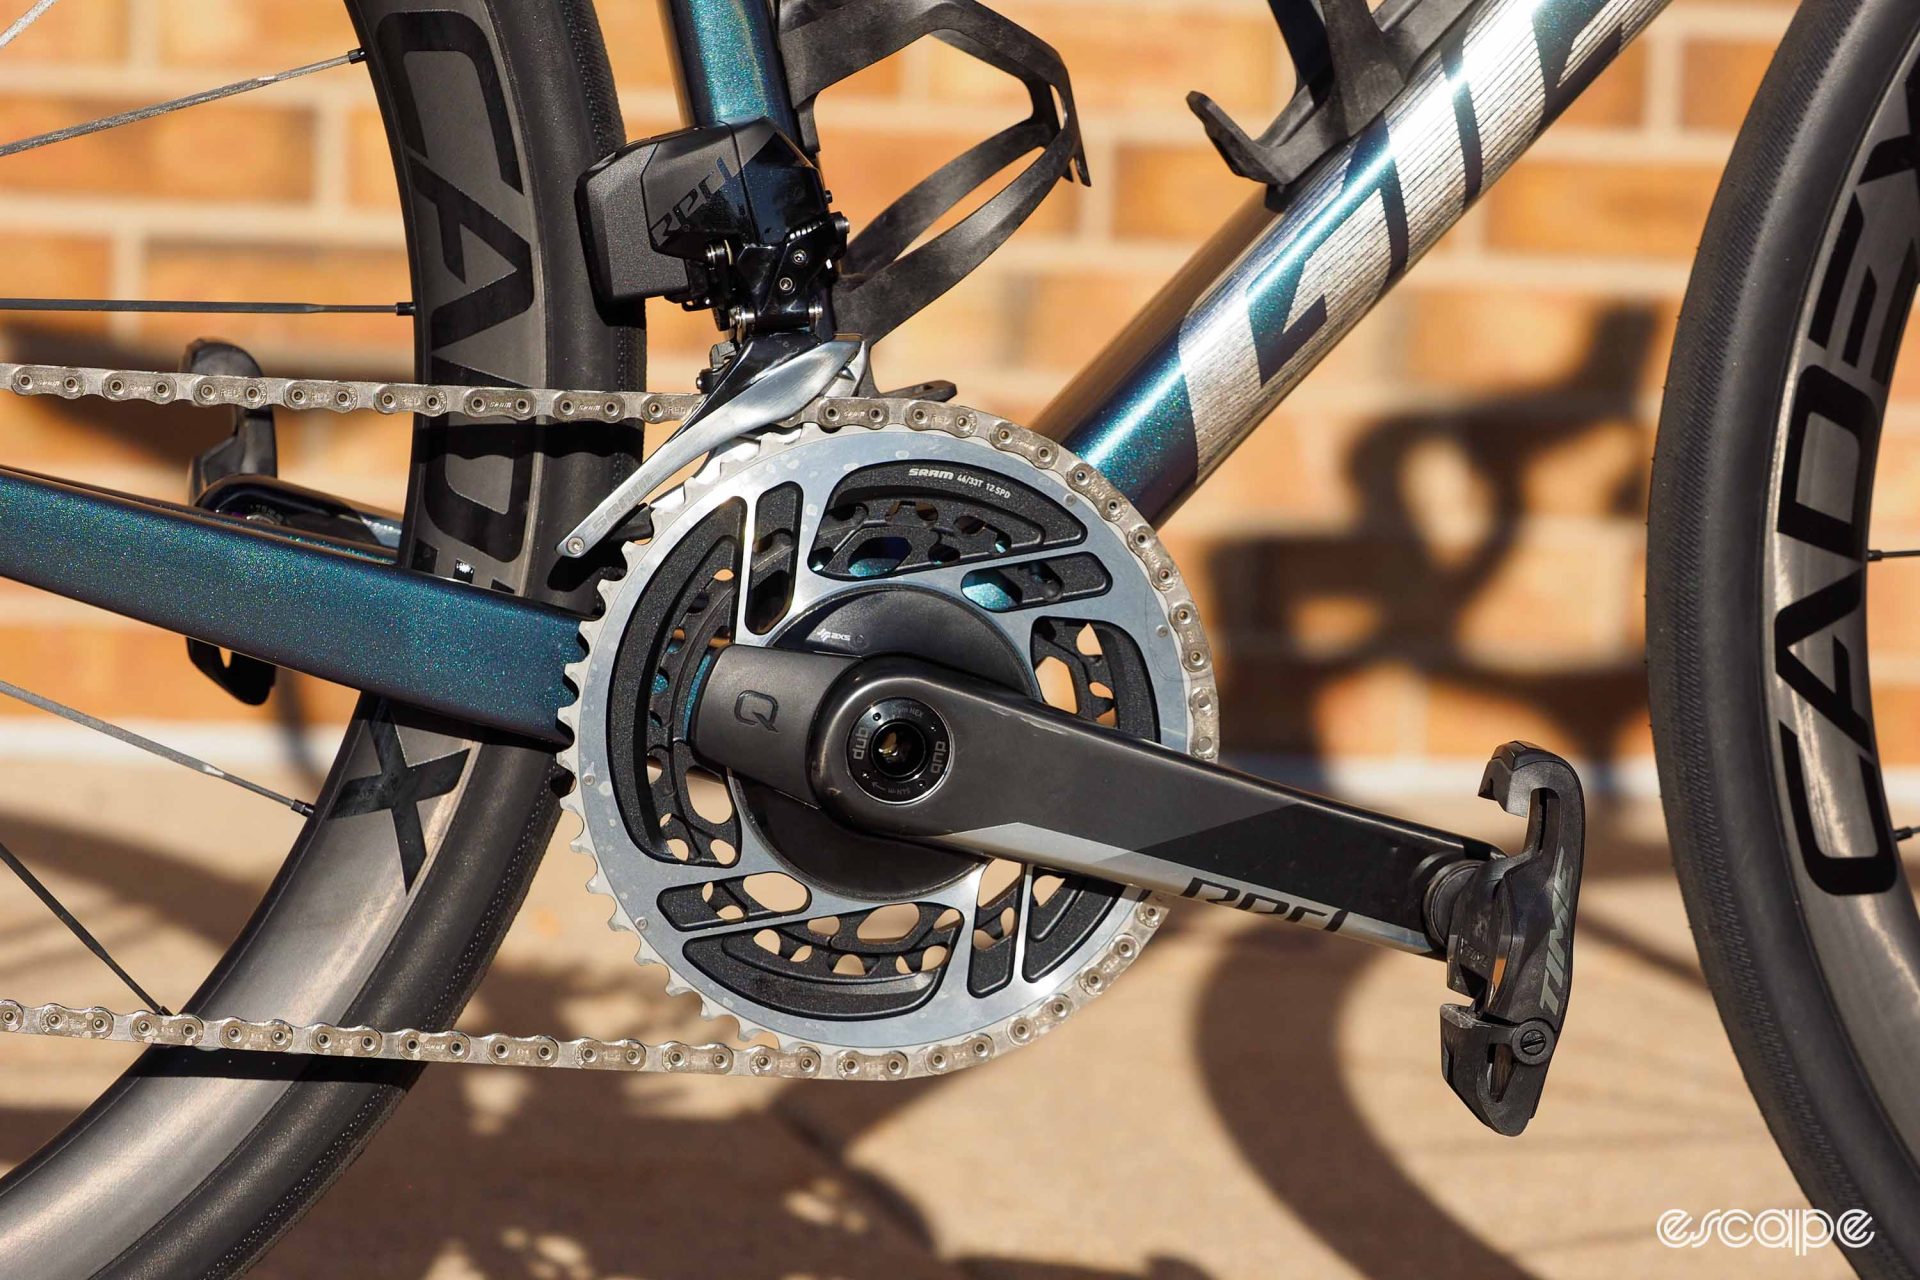 The crankset and front derailleur, which are SRAM's Red components, including a power meter crankset.